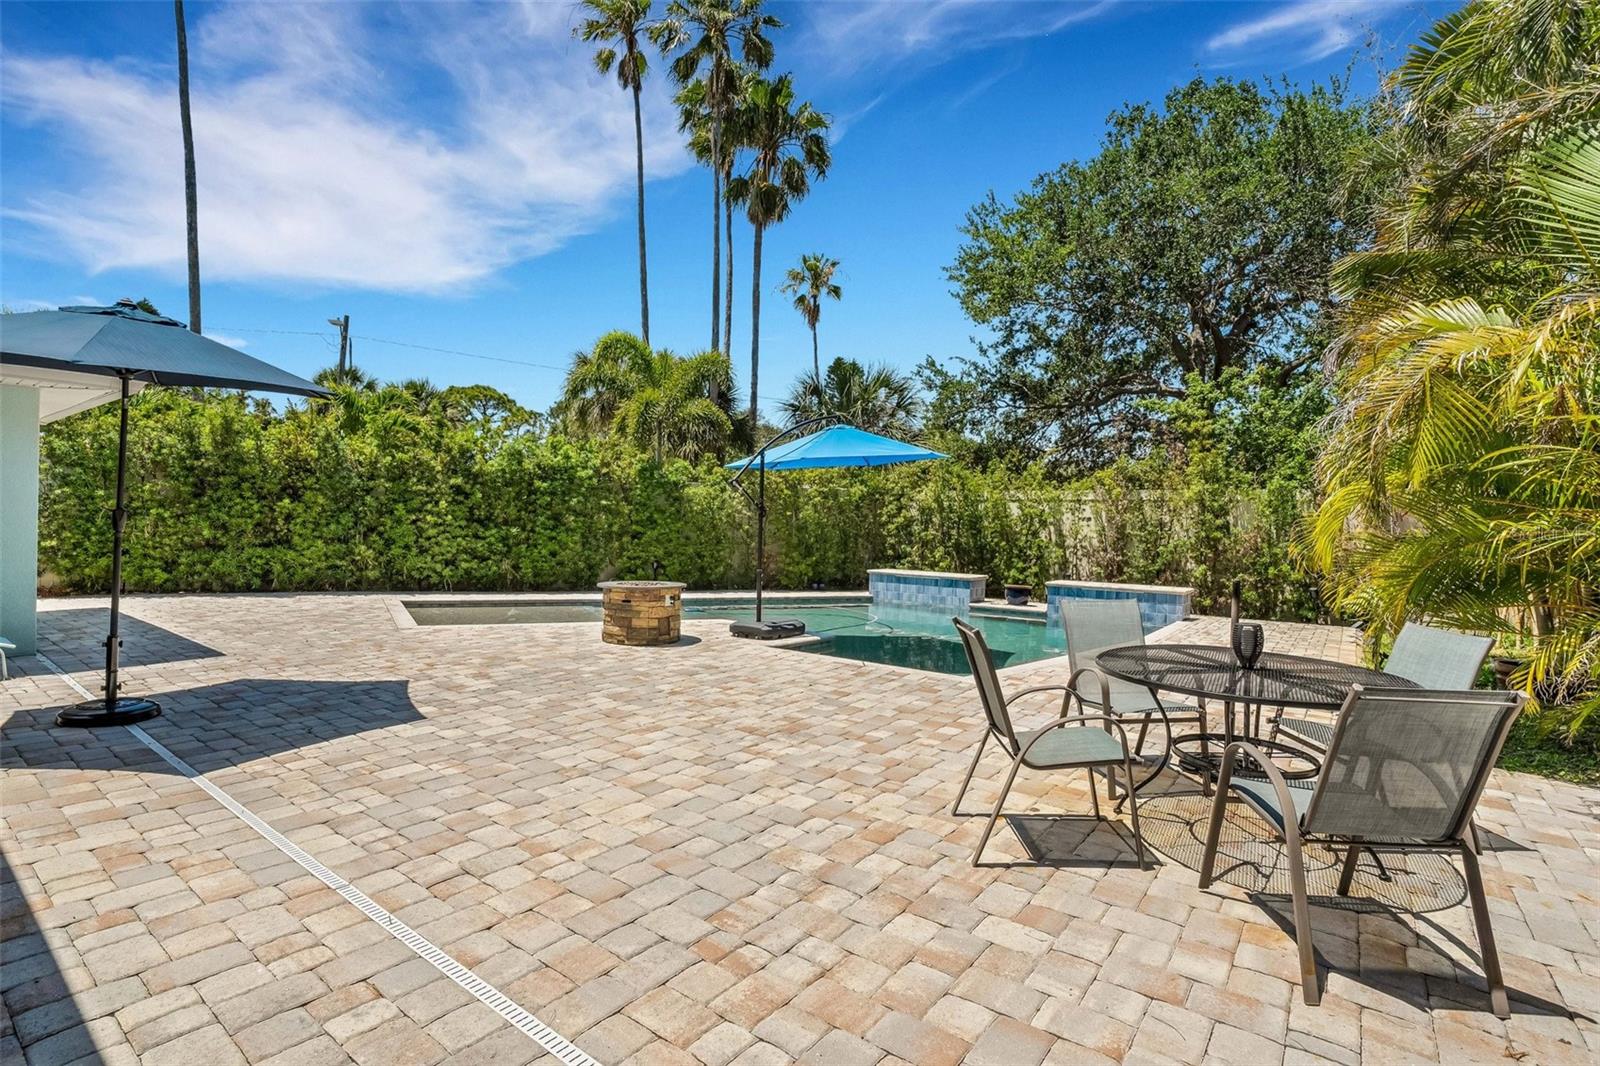 The saltwater, waterfall pool is surrounded by custom pavers.